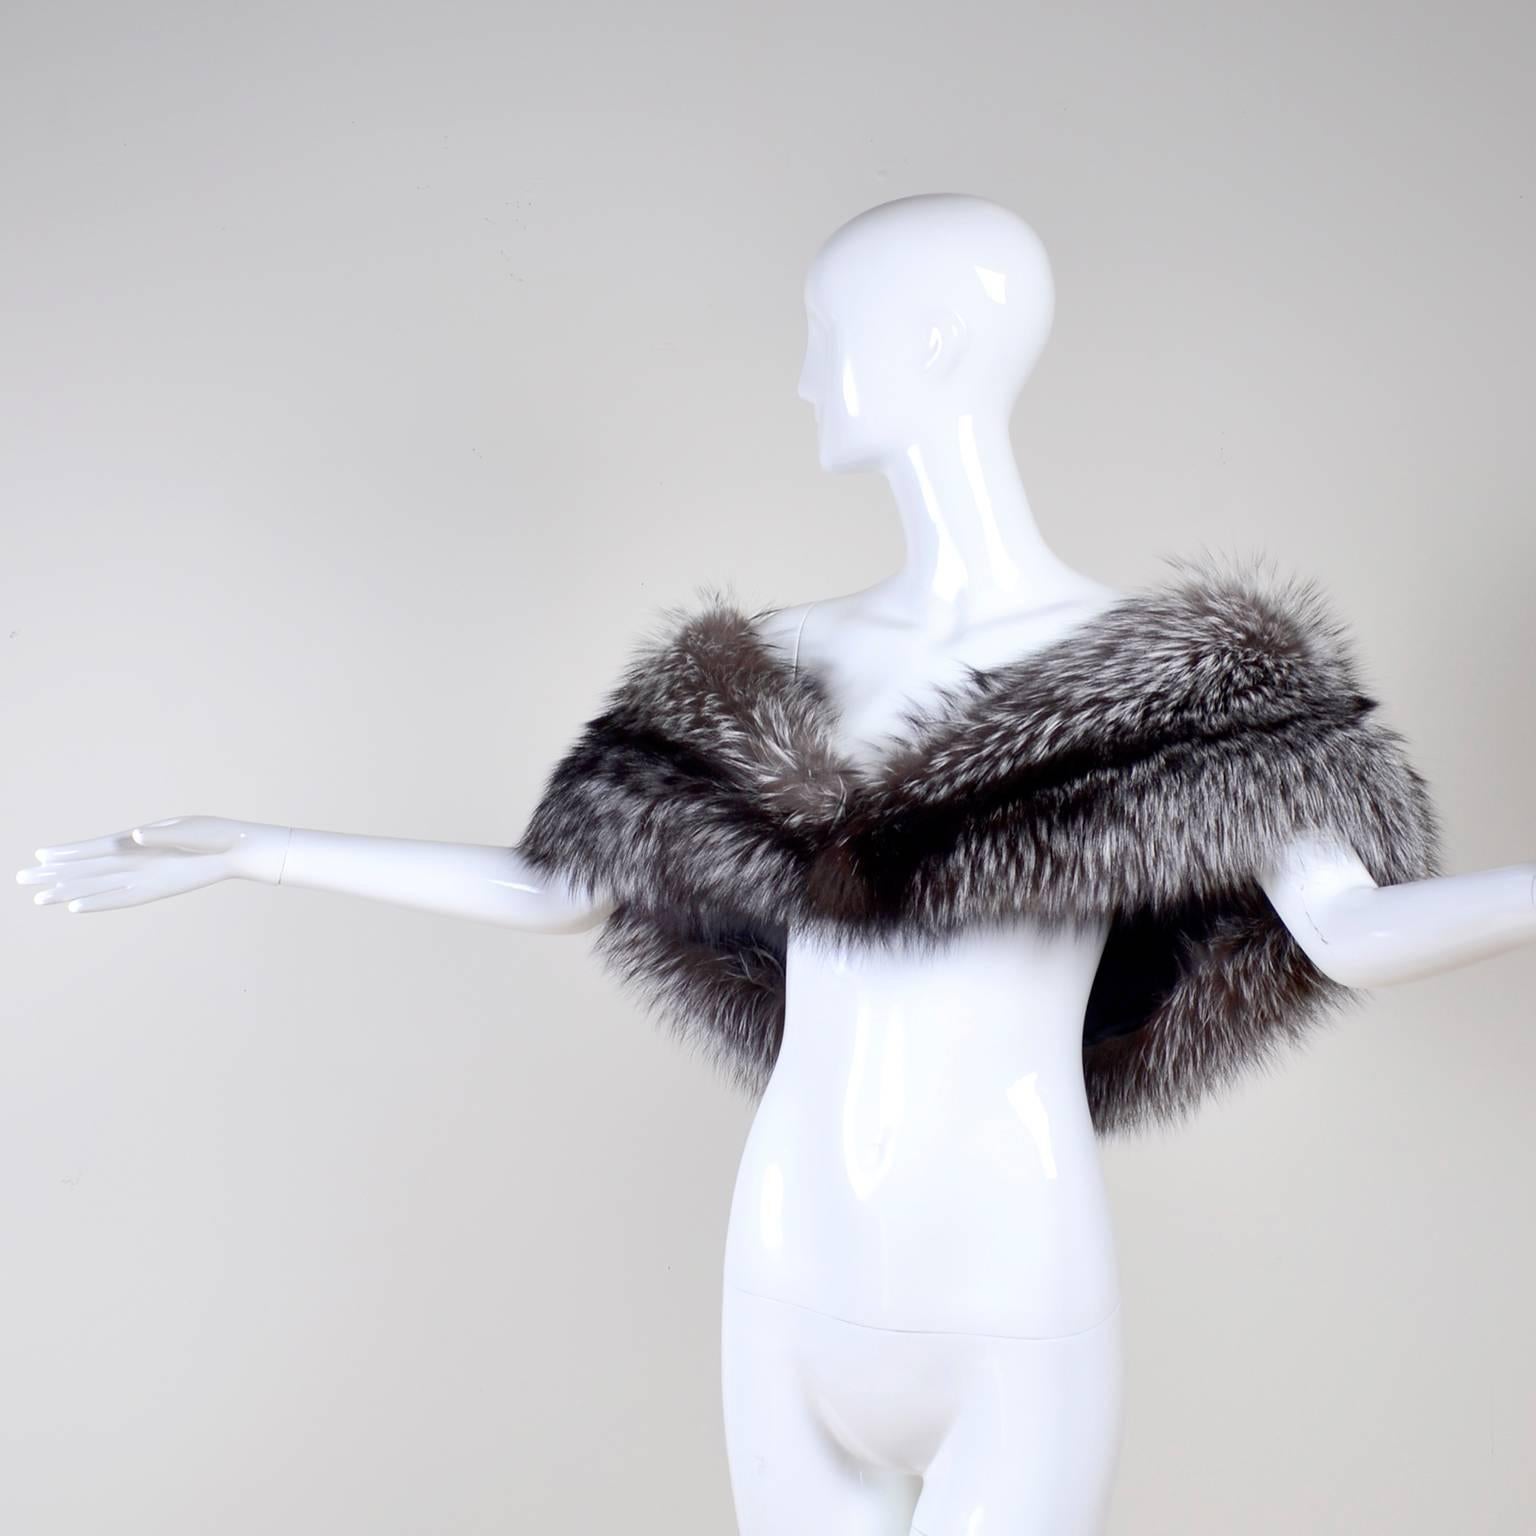 This is an outstanding silver fox fur wrap from Carolina Herrera that was purchased at Saks Fifth Avenue.  This stunningly beautiful stole has a knotted ball front closure and is beautifully lined in silk.  The wrap fits most and measures 26” across